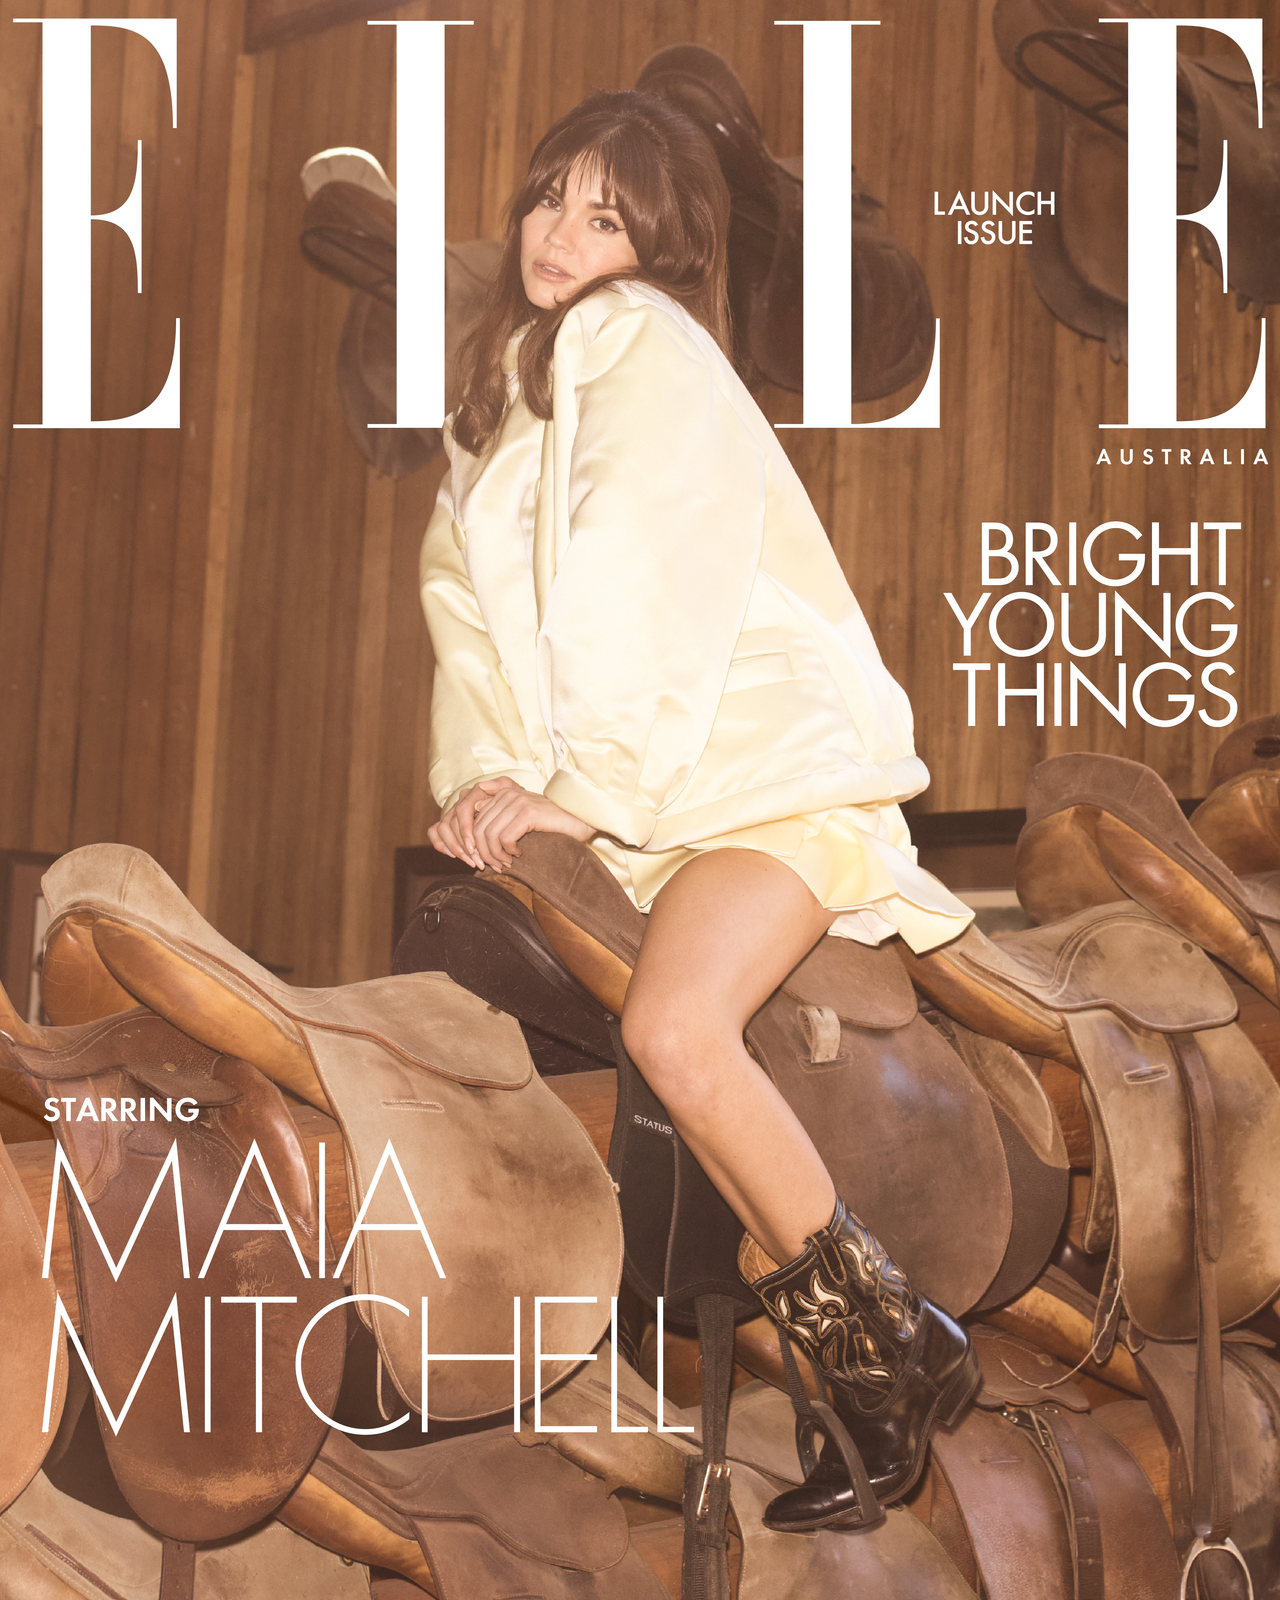 BRIGHT YOUNG THINGS - ELLE AUSTRALIA